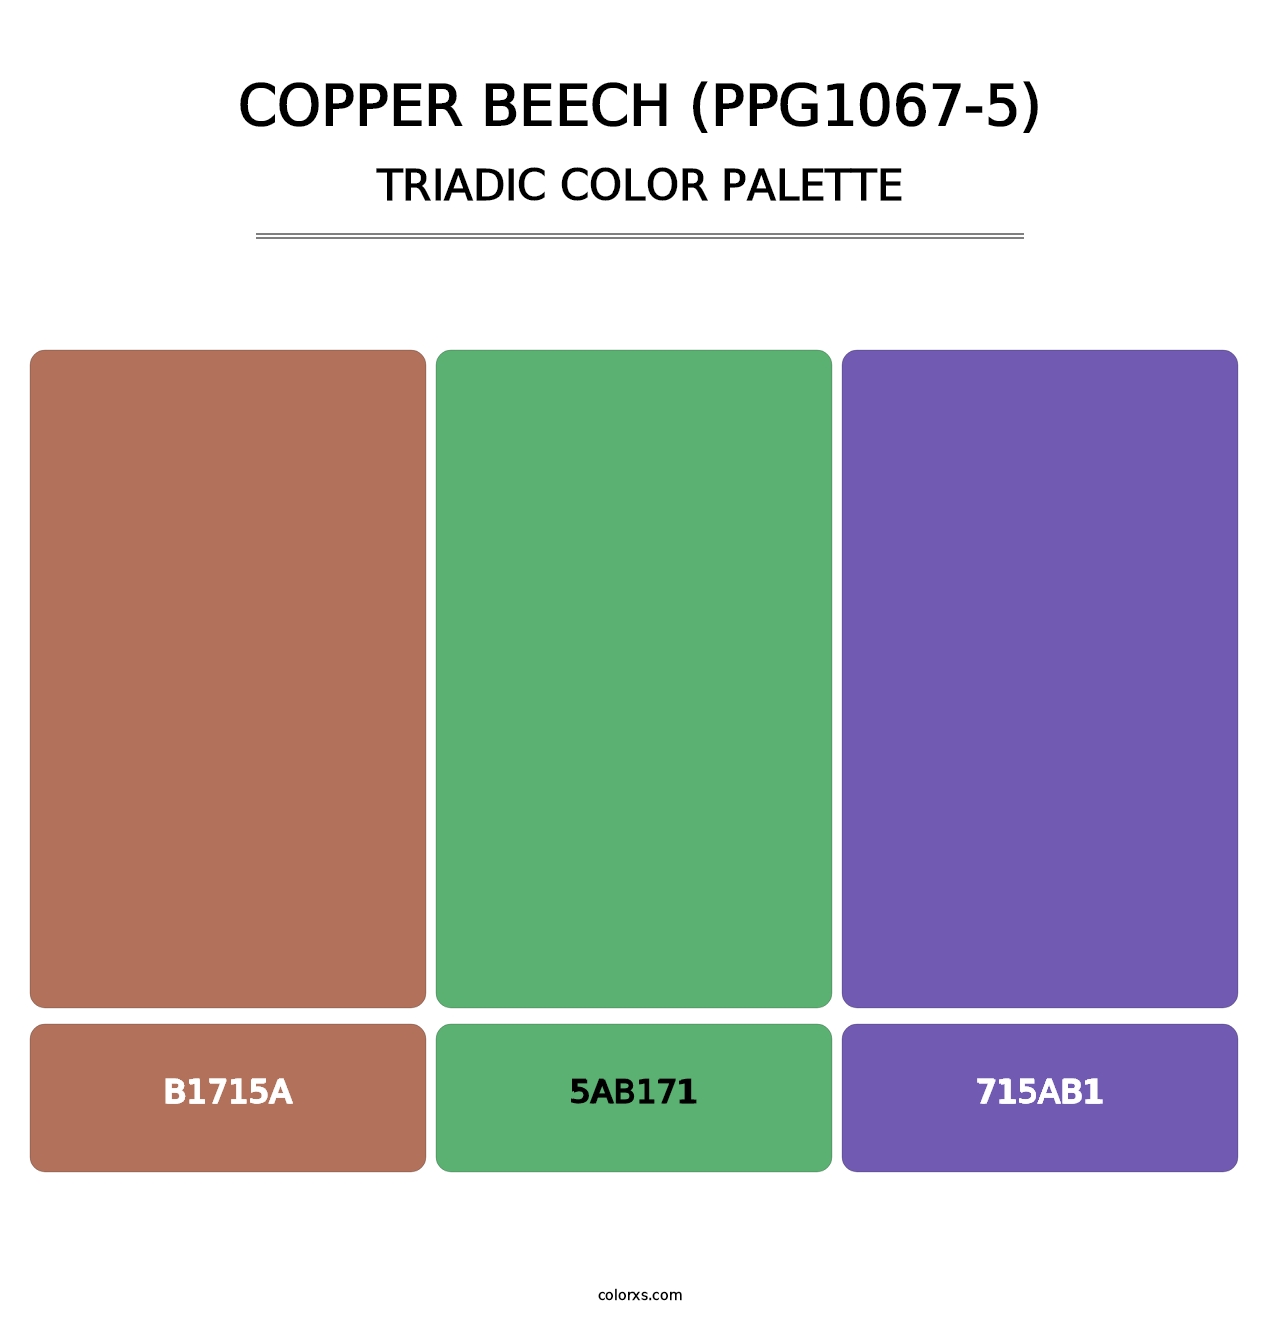 Copper Beech (PPG1067-5) - Triadic Color Palette